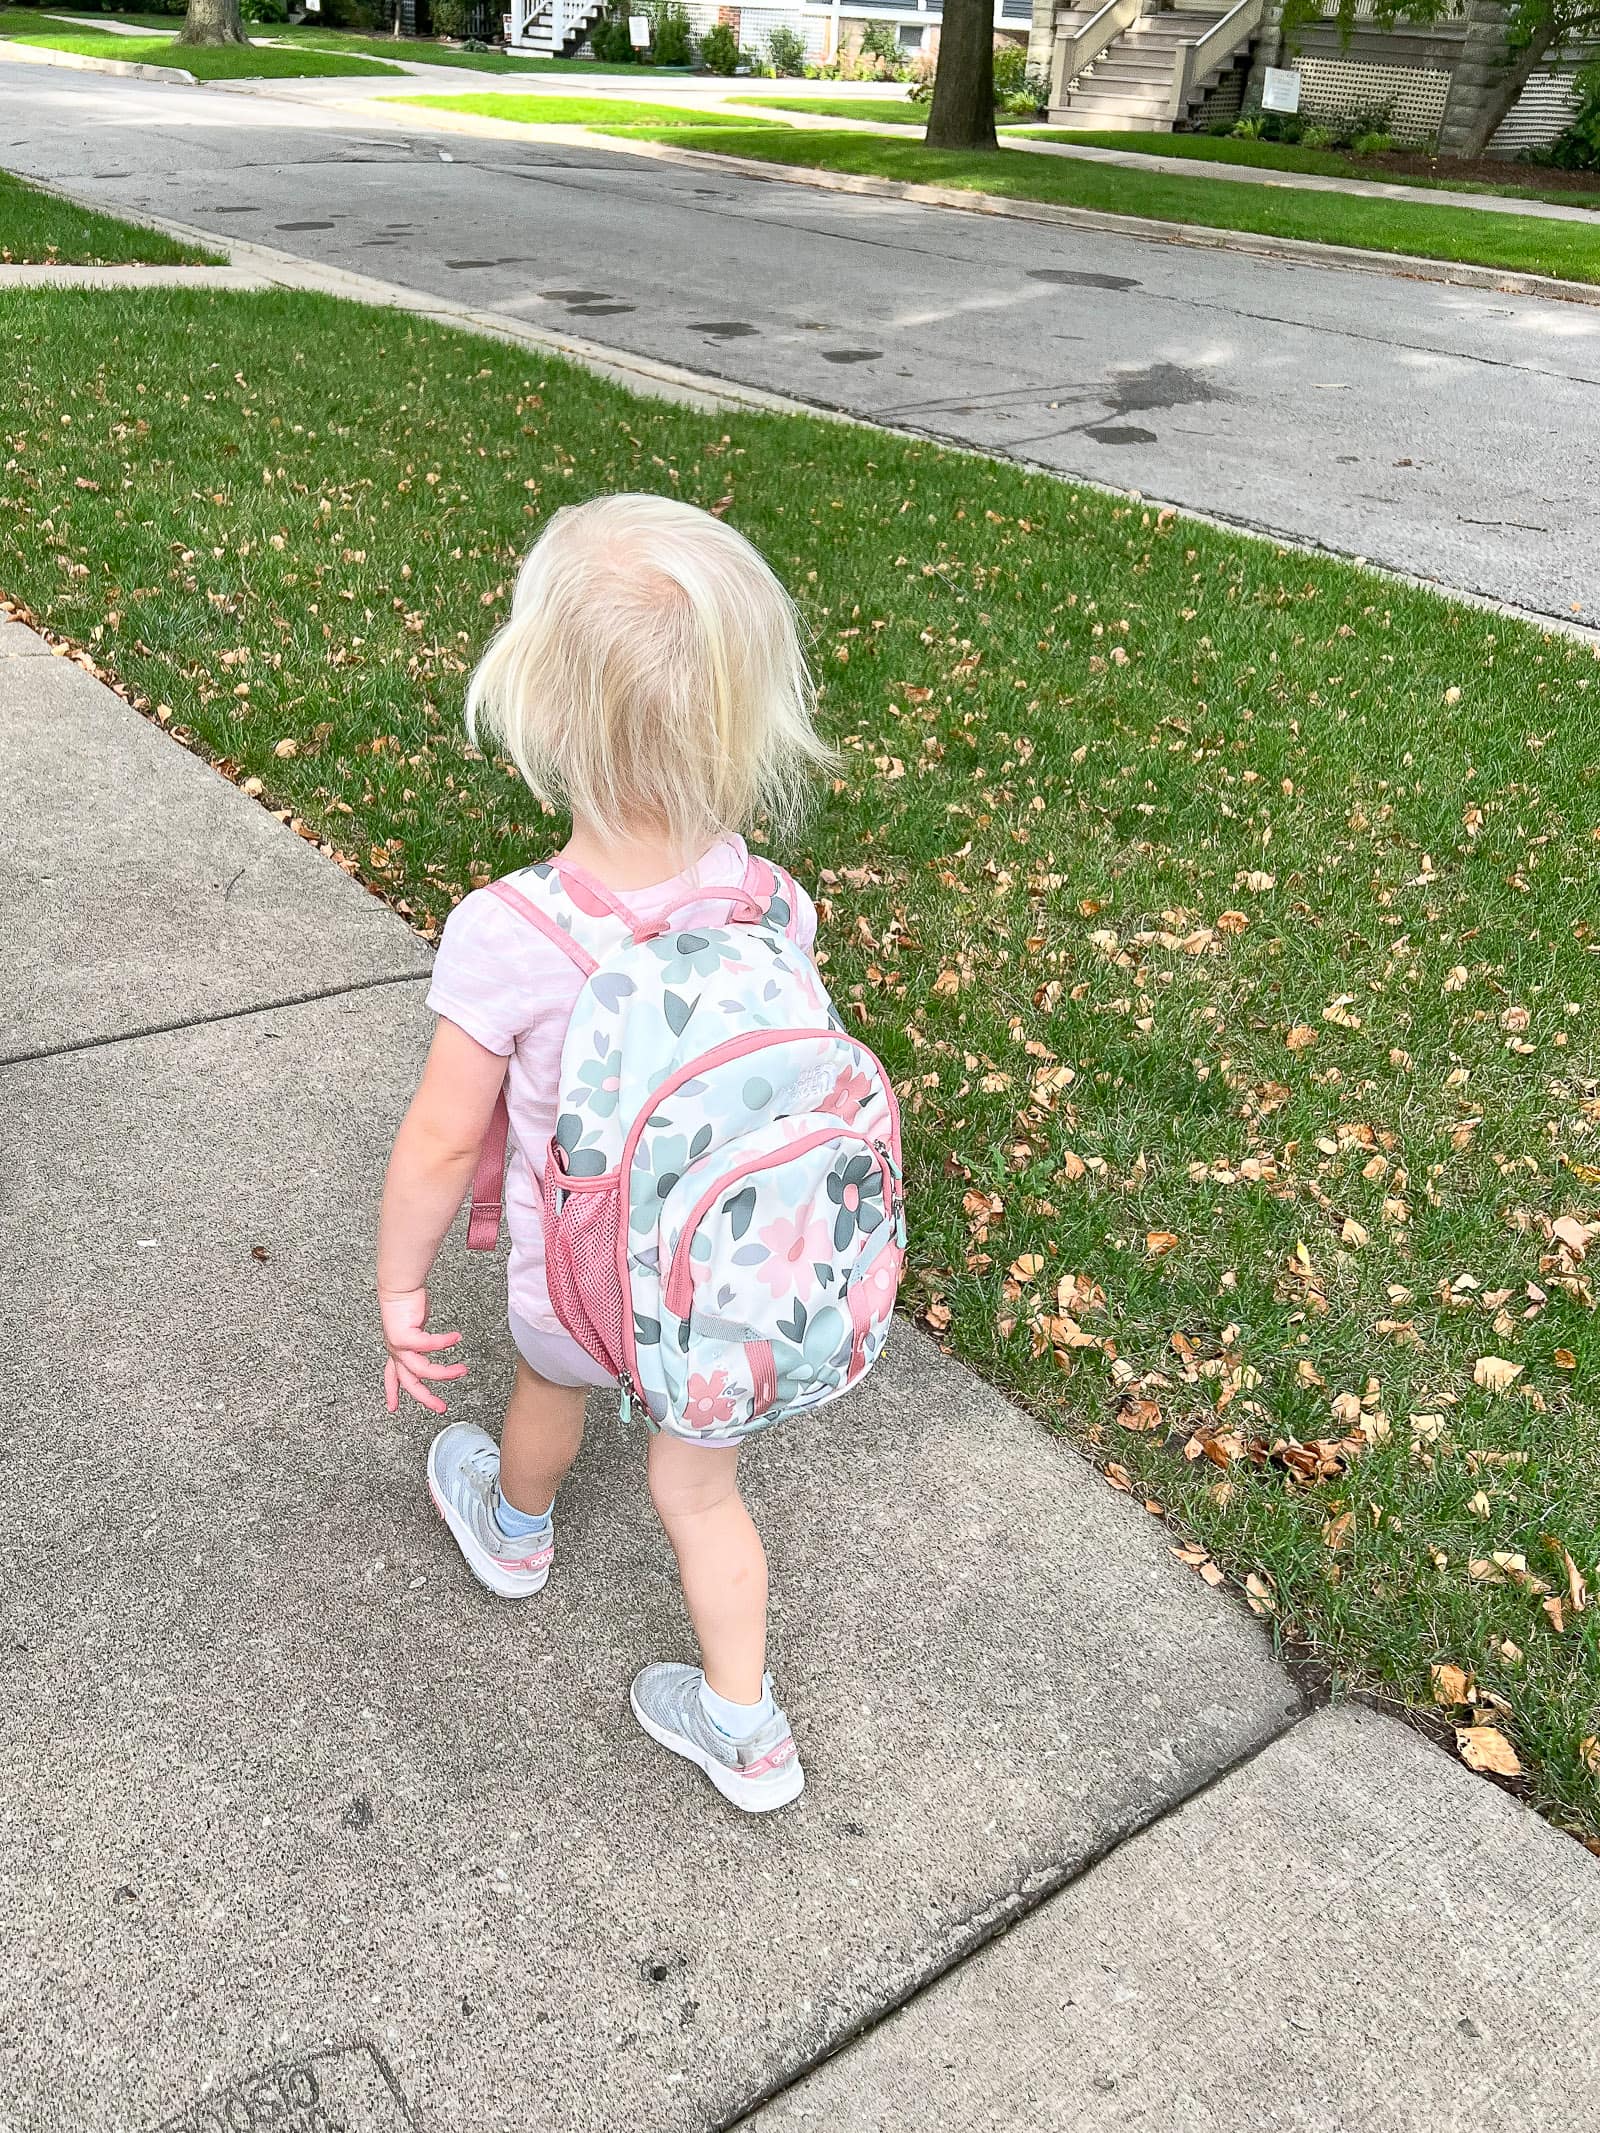 Rory walking home